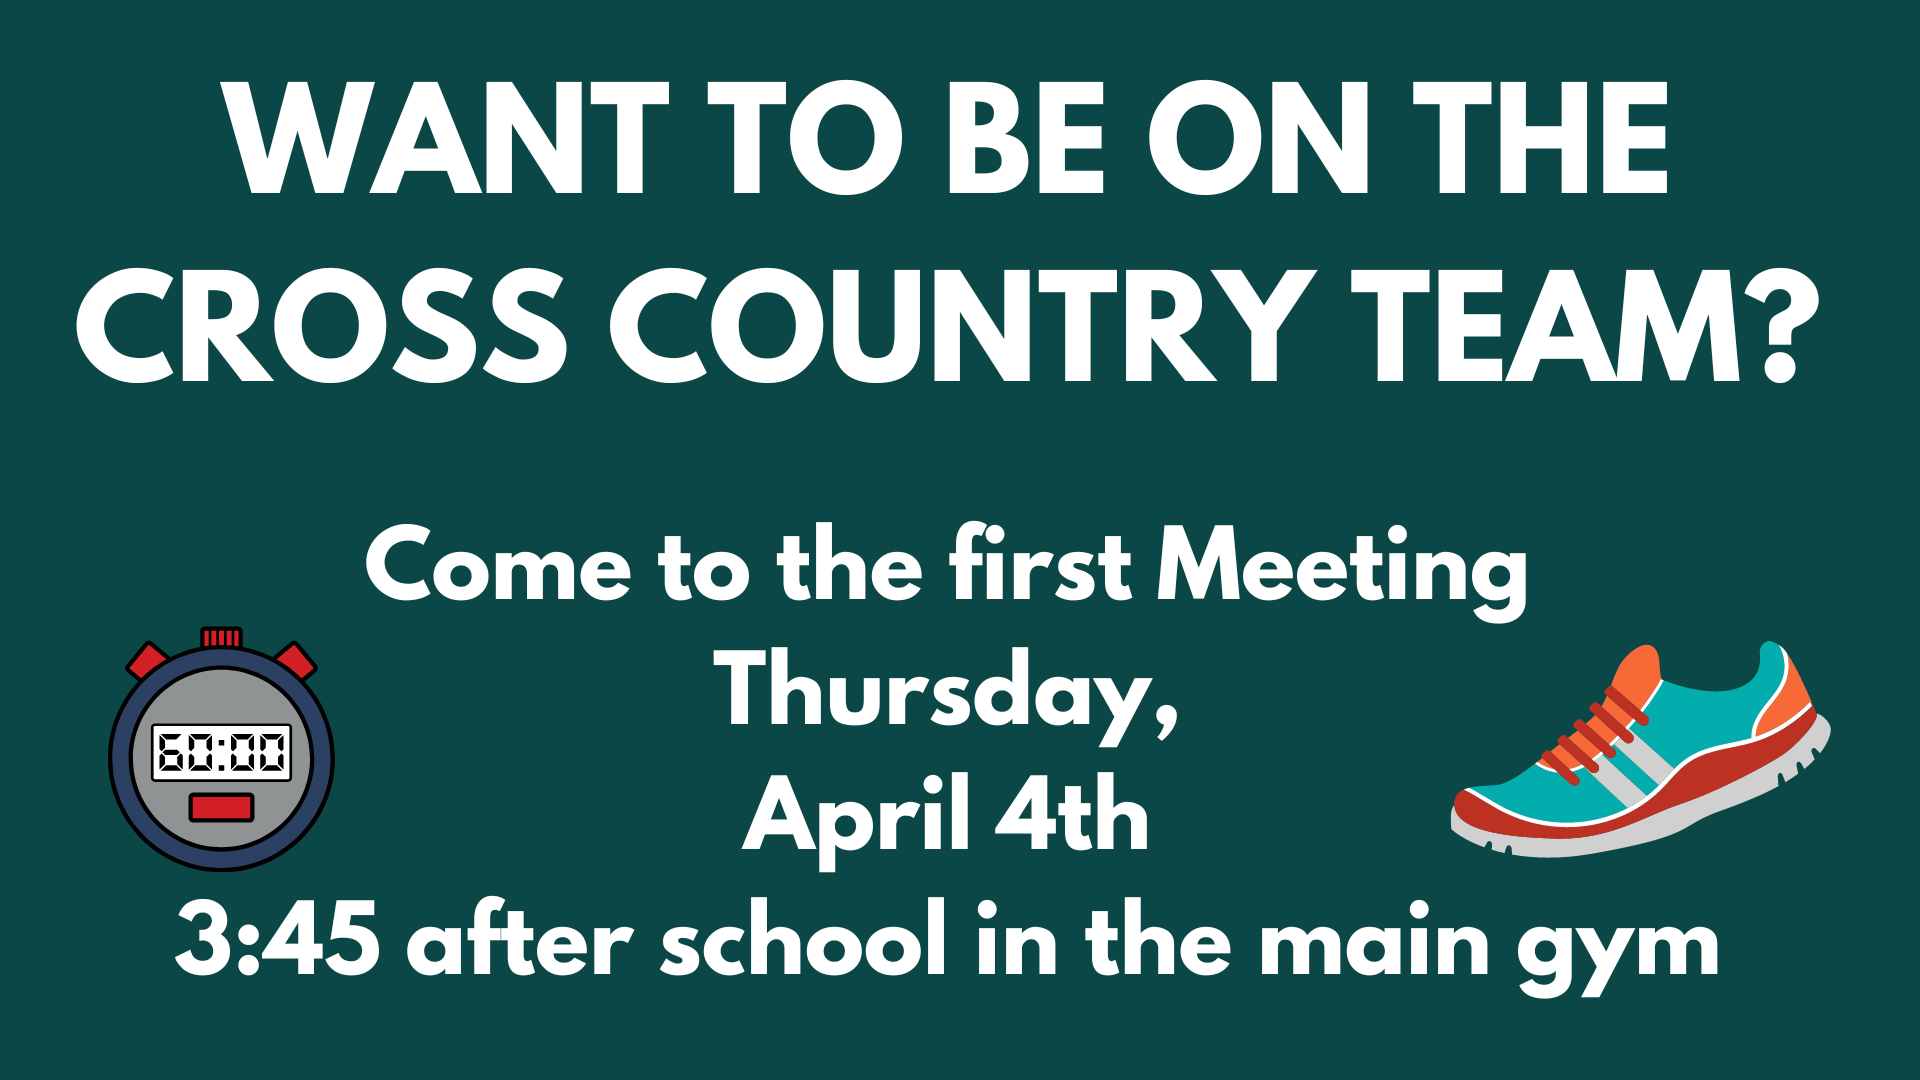 Want to be on the Cross Country team?  Come to the first meeting, Thursday, April 4th at 3:45 in the main gym.  The meeting should only be 10 minutes.